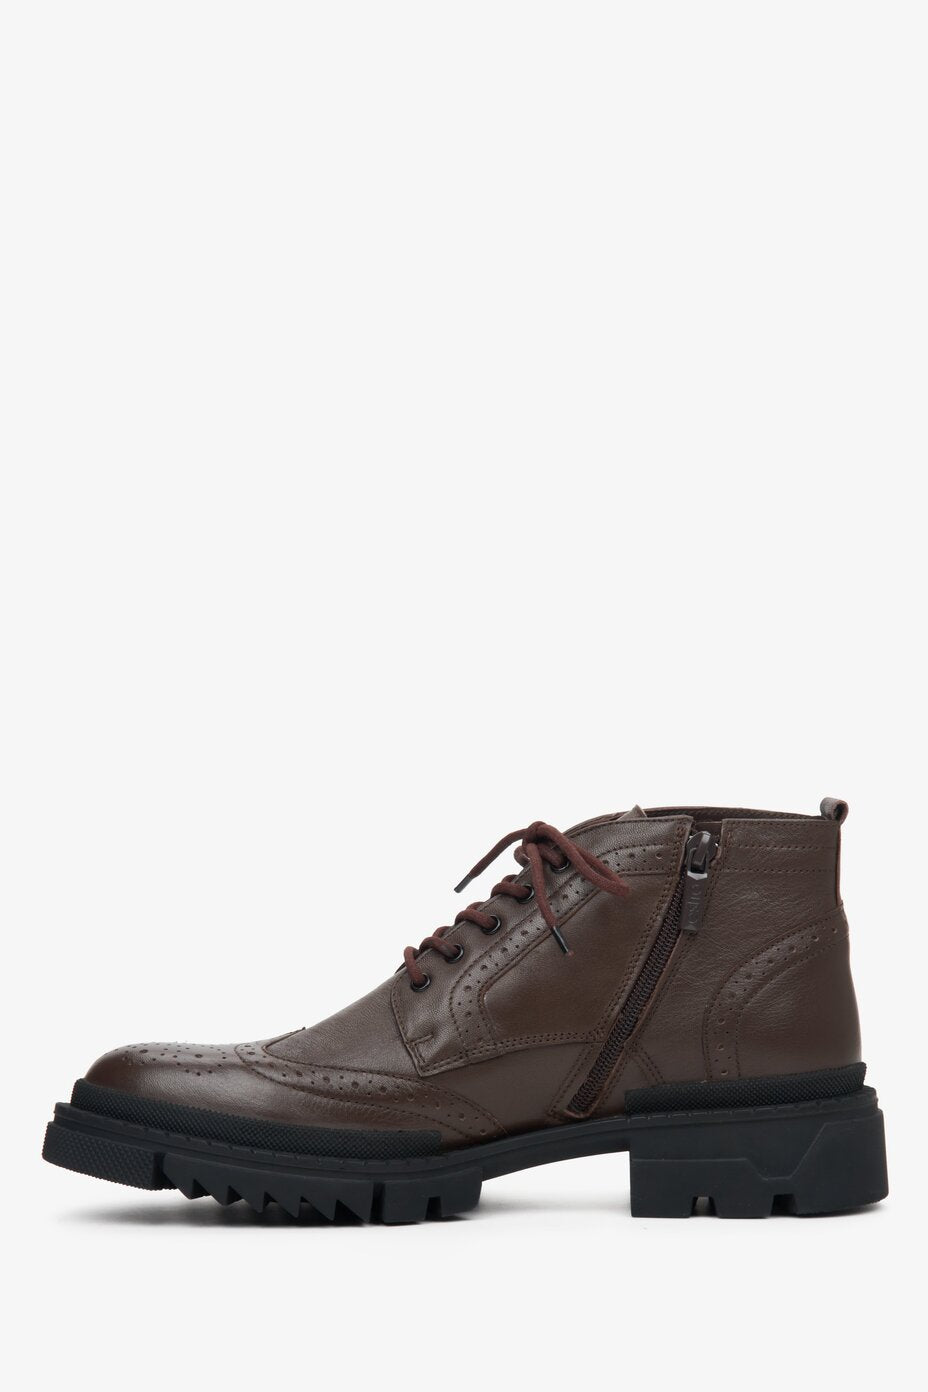 Estro men's lace-up boots - preview of the shoe profile in brown.